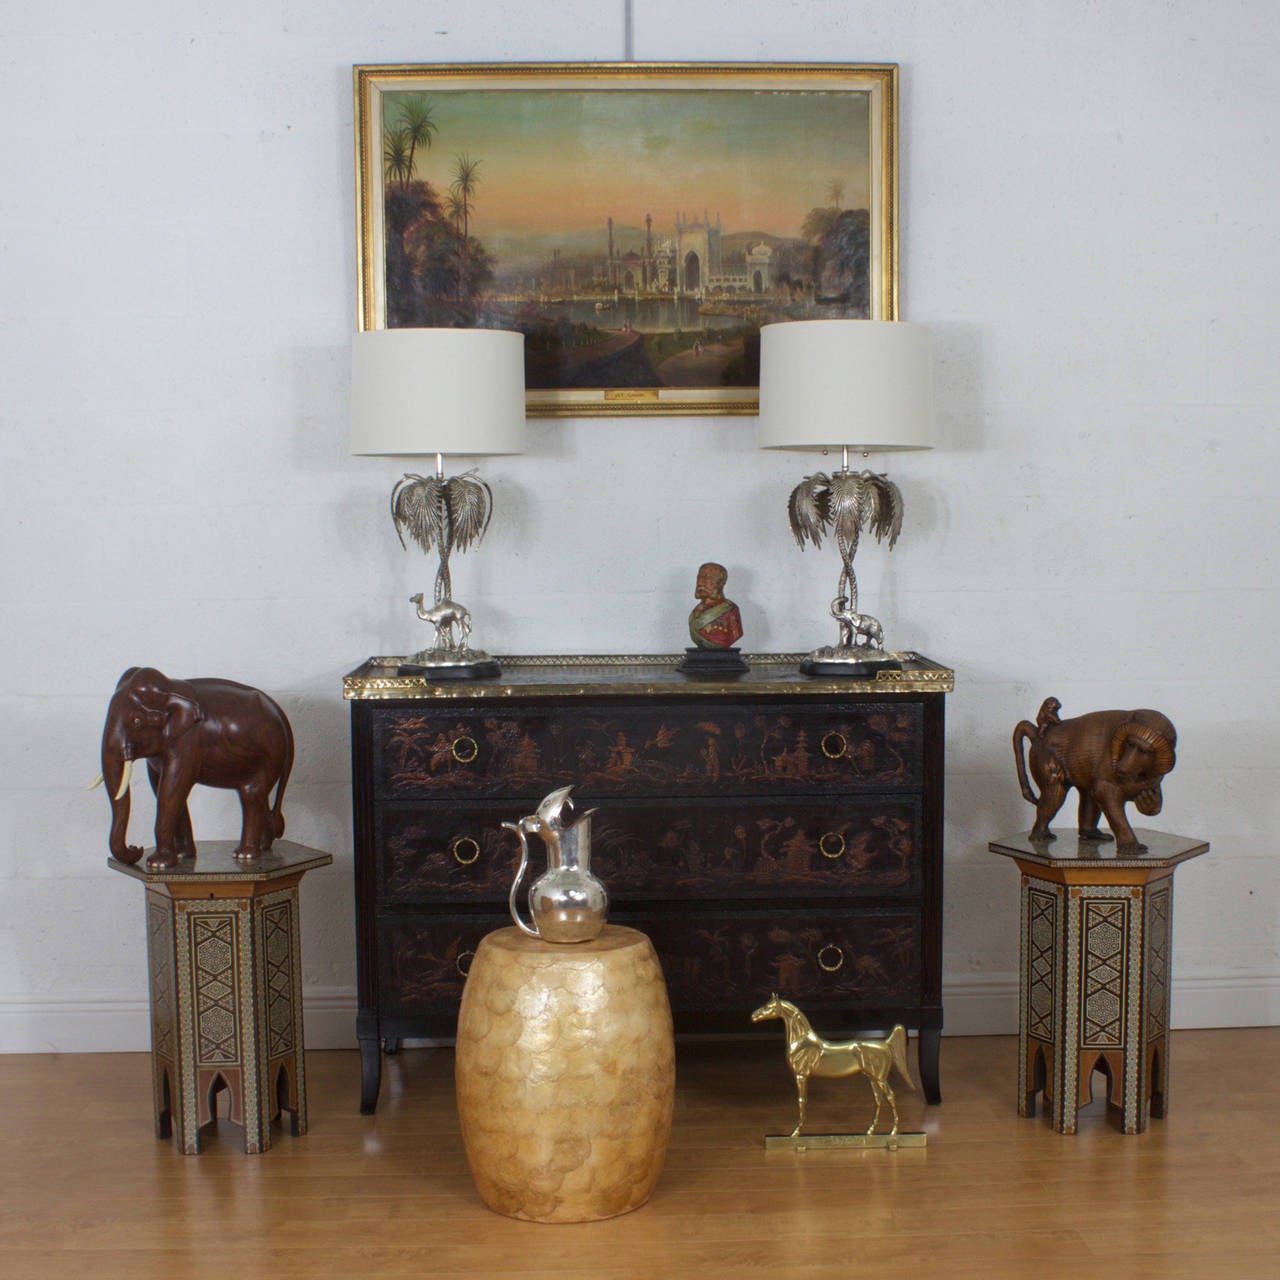 Pair of silvered metal table lamps with exotic tropical compositions that both have stylized palm trees on terra firma and one lamp with an Elephant and one with a Camel. Featuring bases and presented on biomorphic and ebonized plinths. Newly wired.